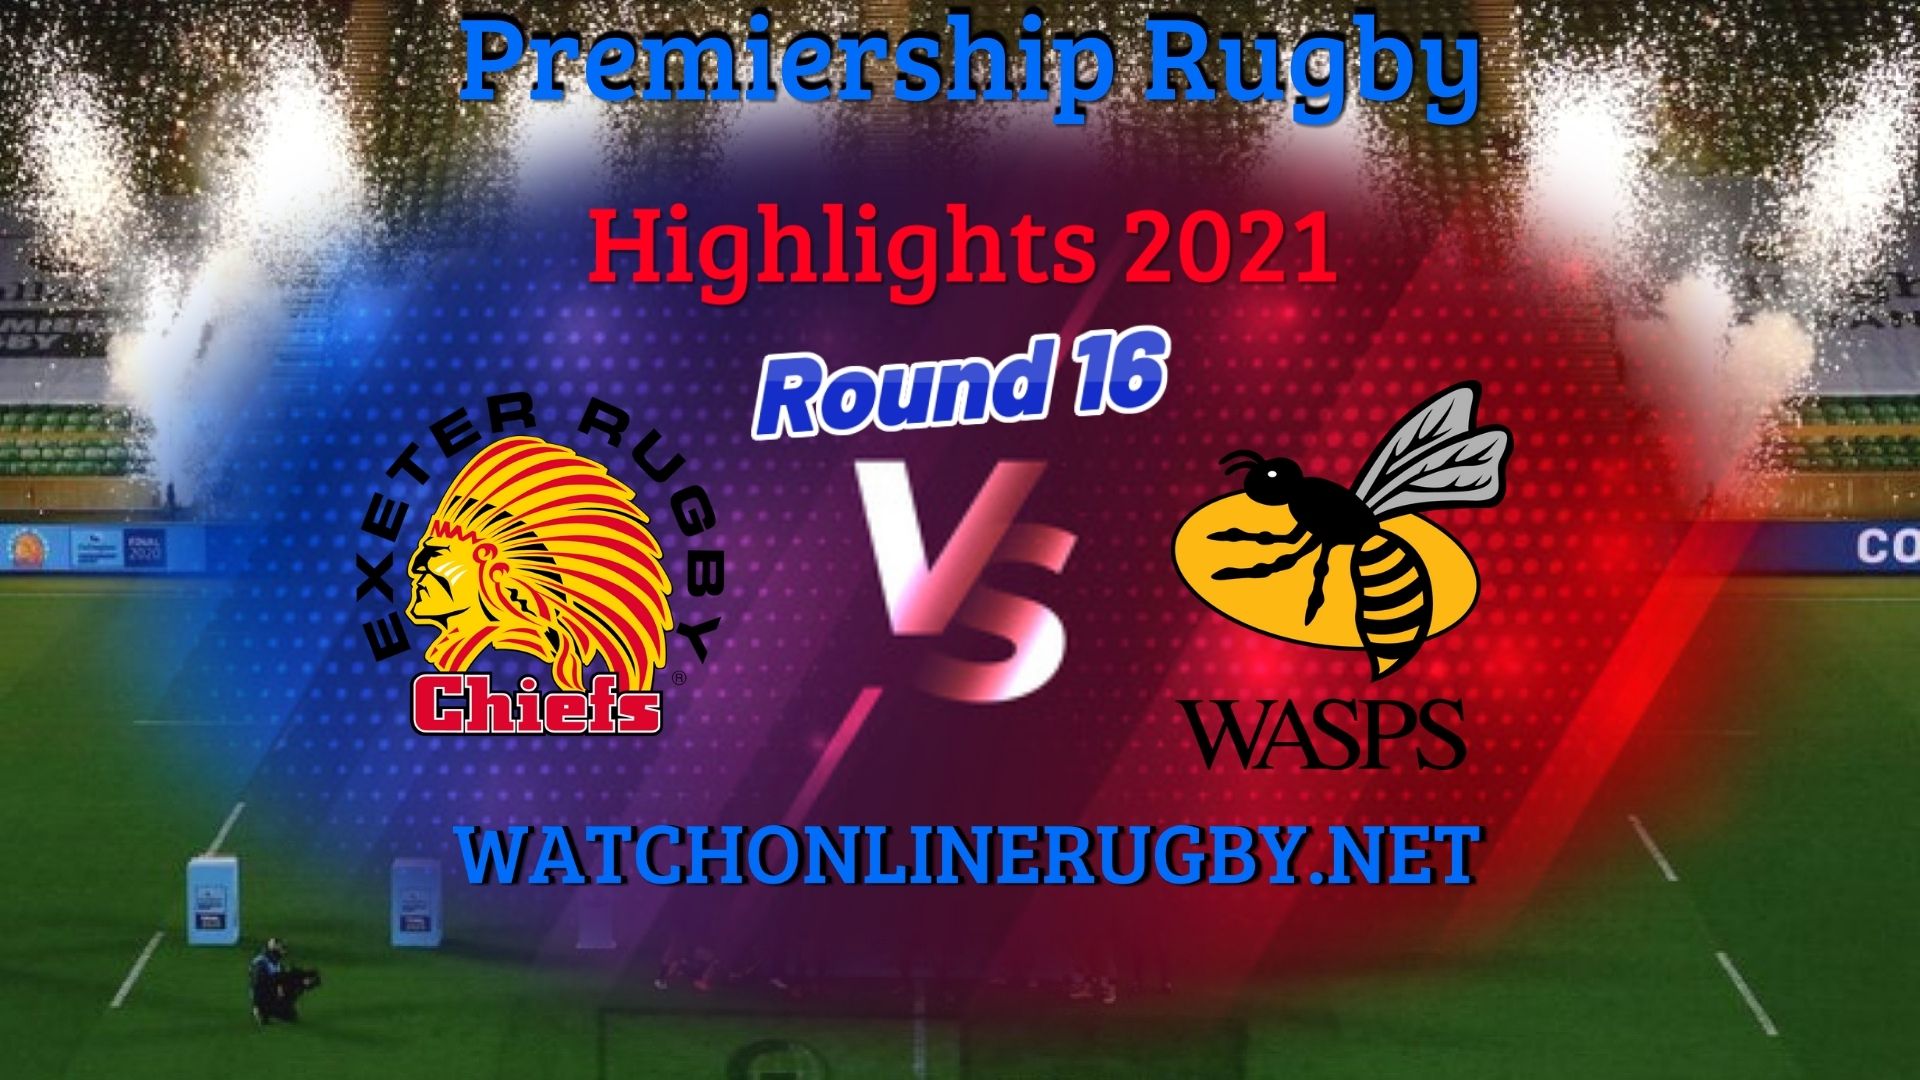 Exeter Chiefs Vs Wasps Premiership Rugby 2021 RD 16